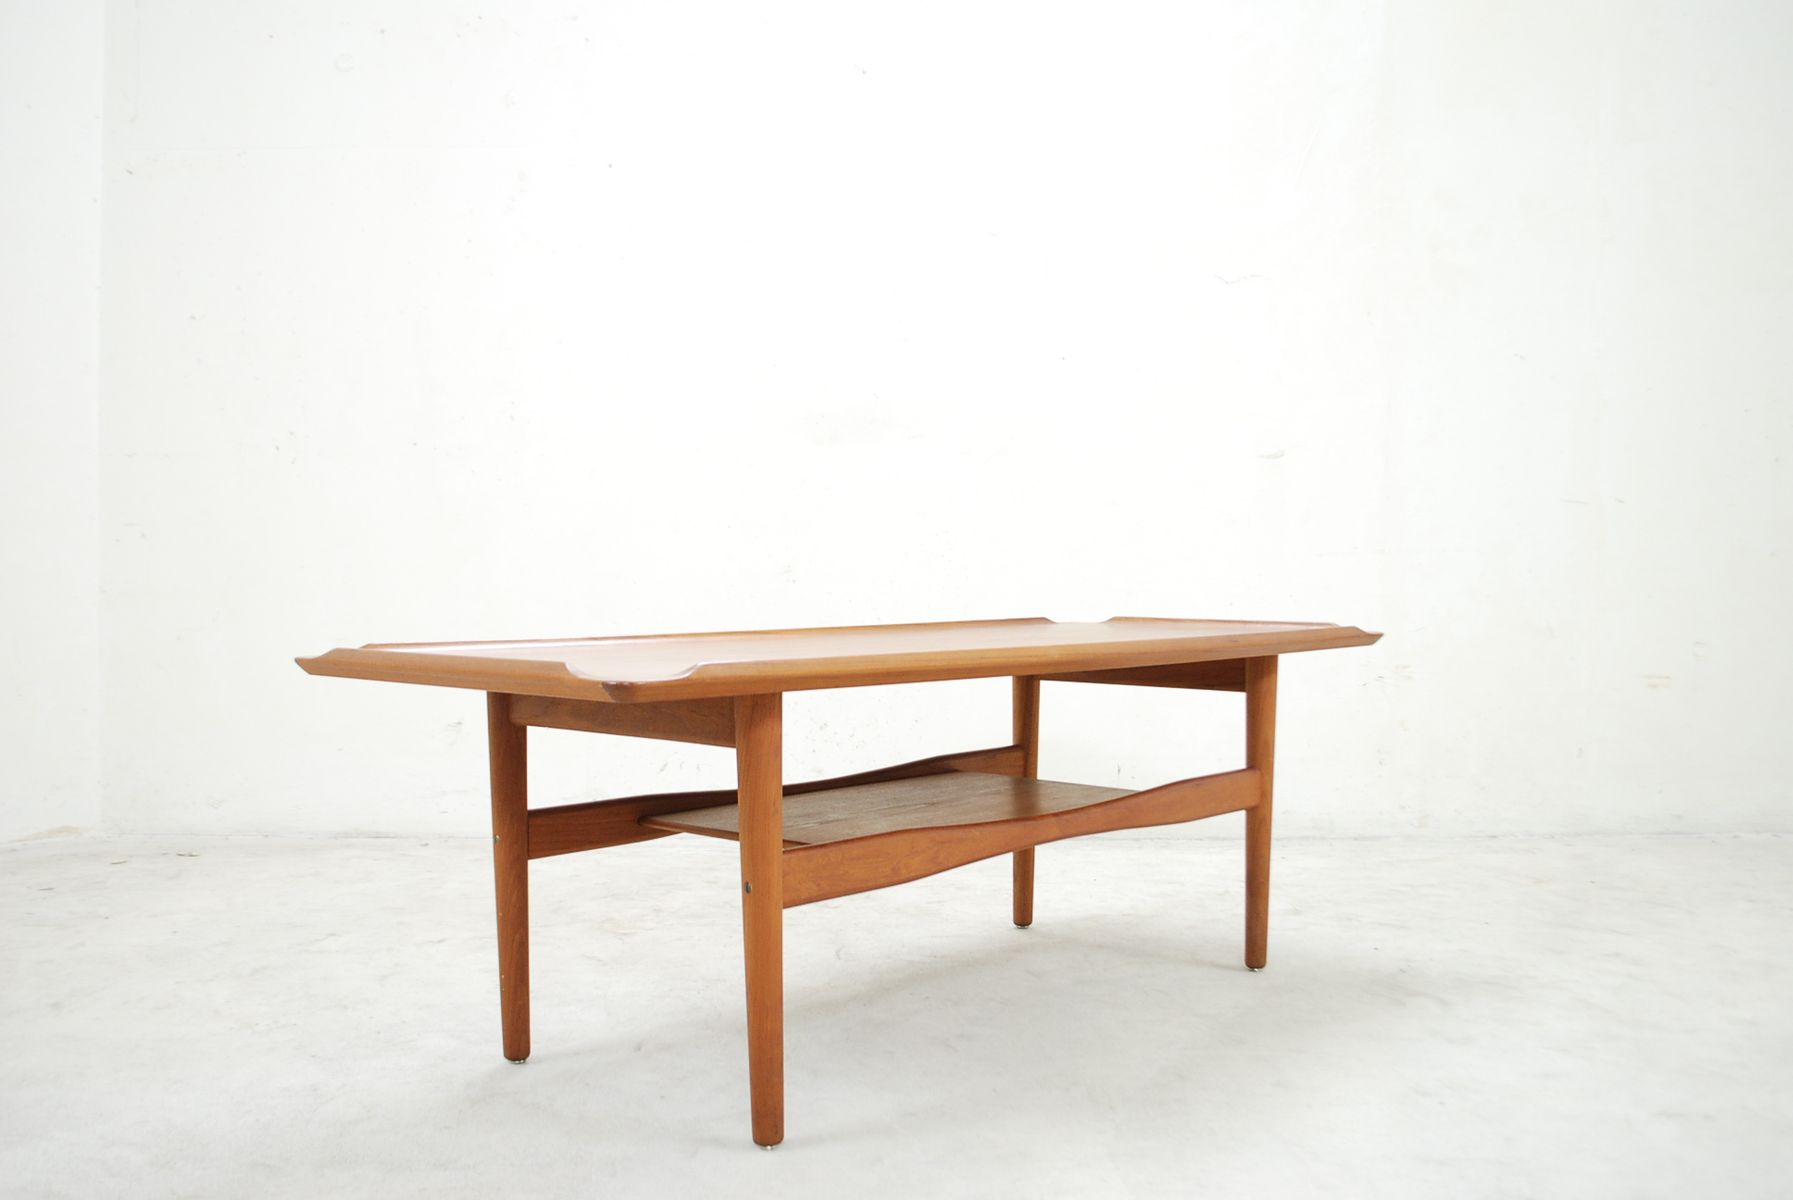 Danish Modern Teak Coffee Table By Poul Jensen For Selig For Sale At Pamono